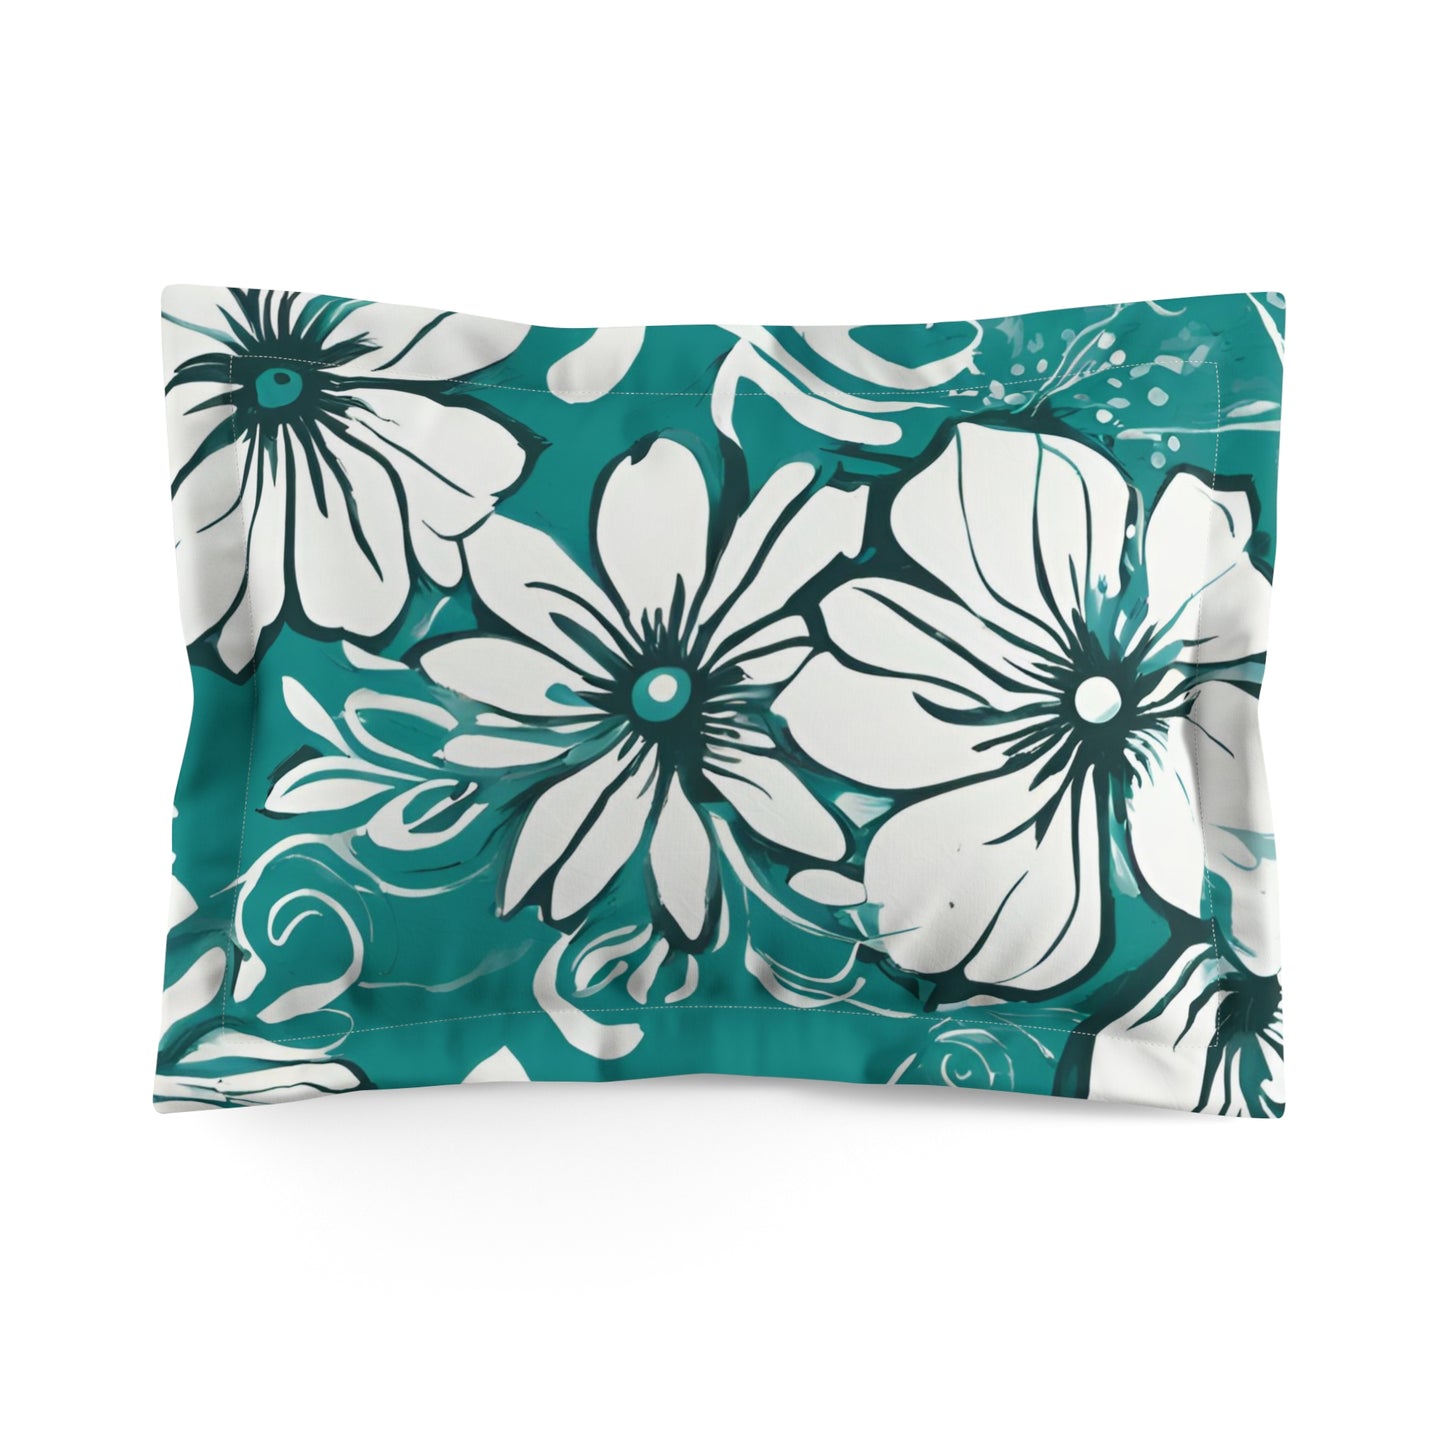 Turquoise And White Graphic Floral Pillow Sham